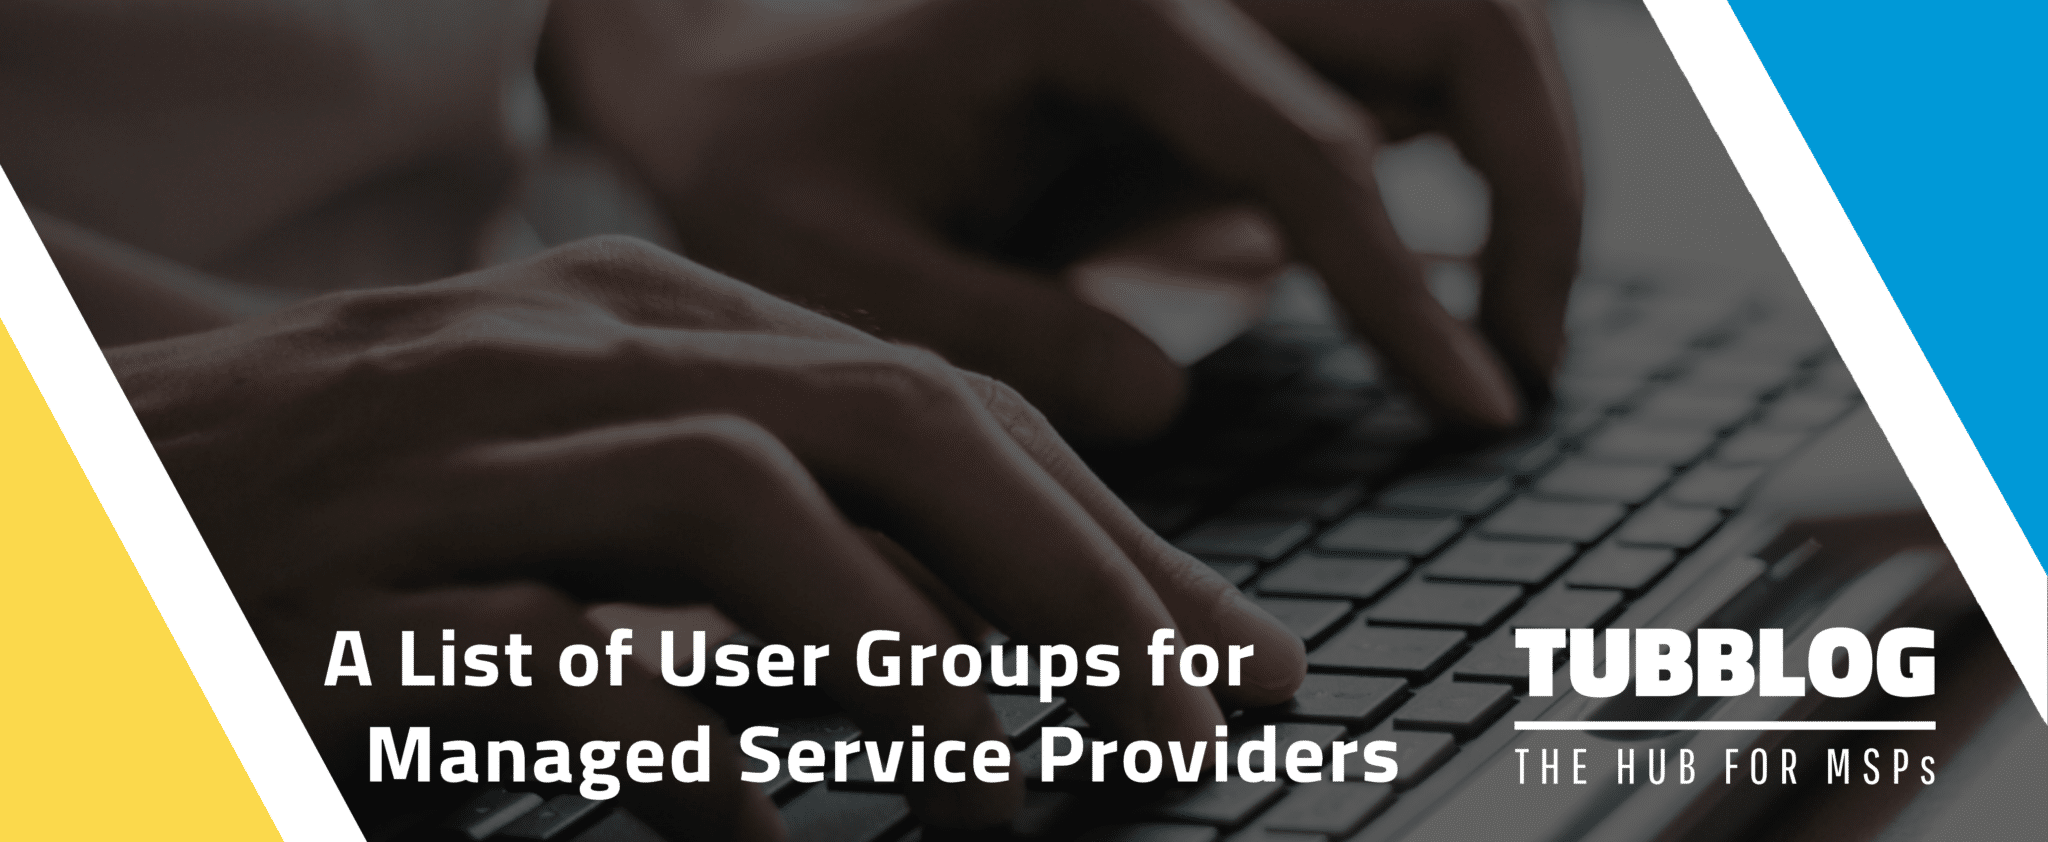 A List of User Groups for Managed Service Providers image